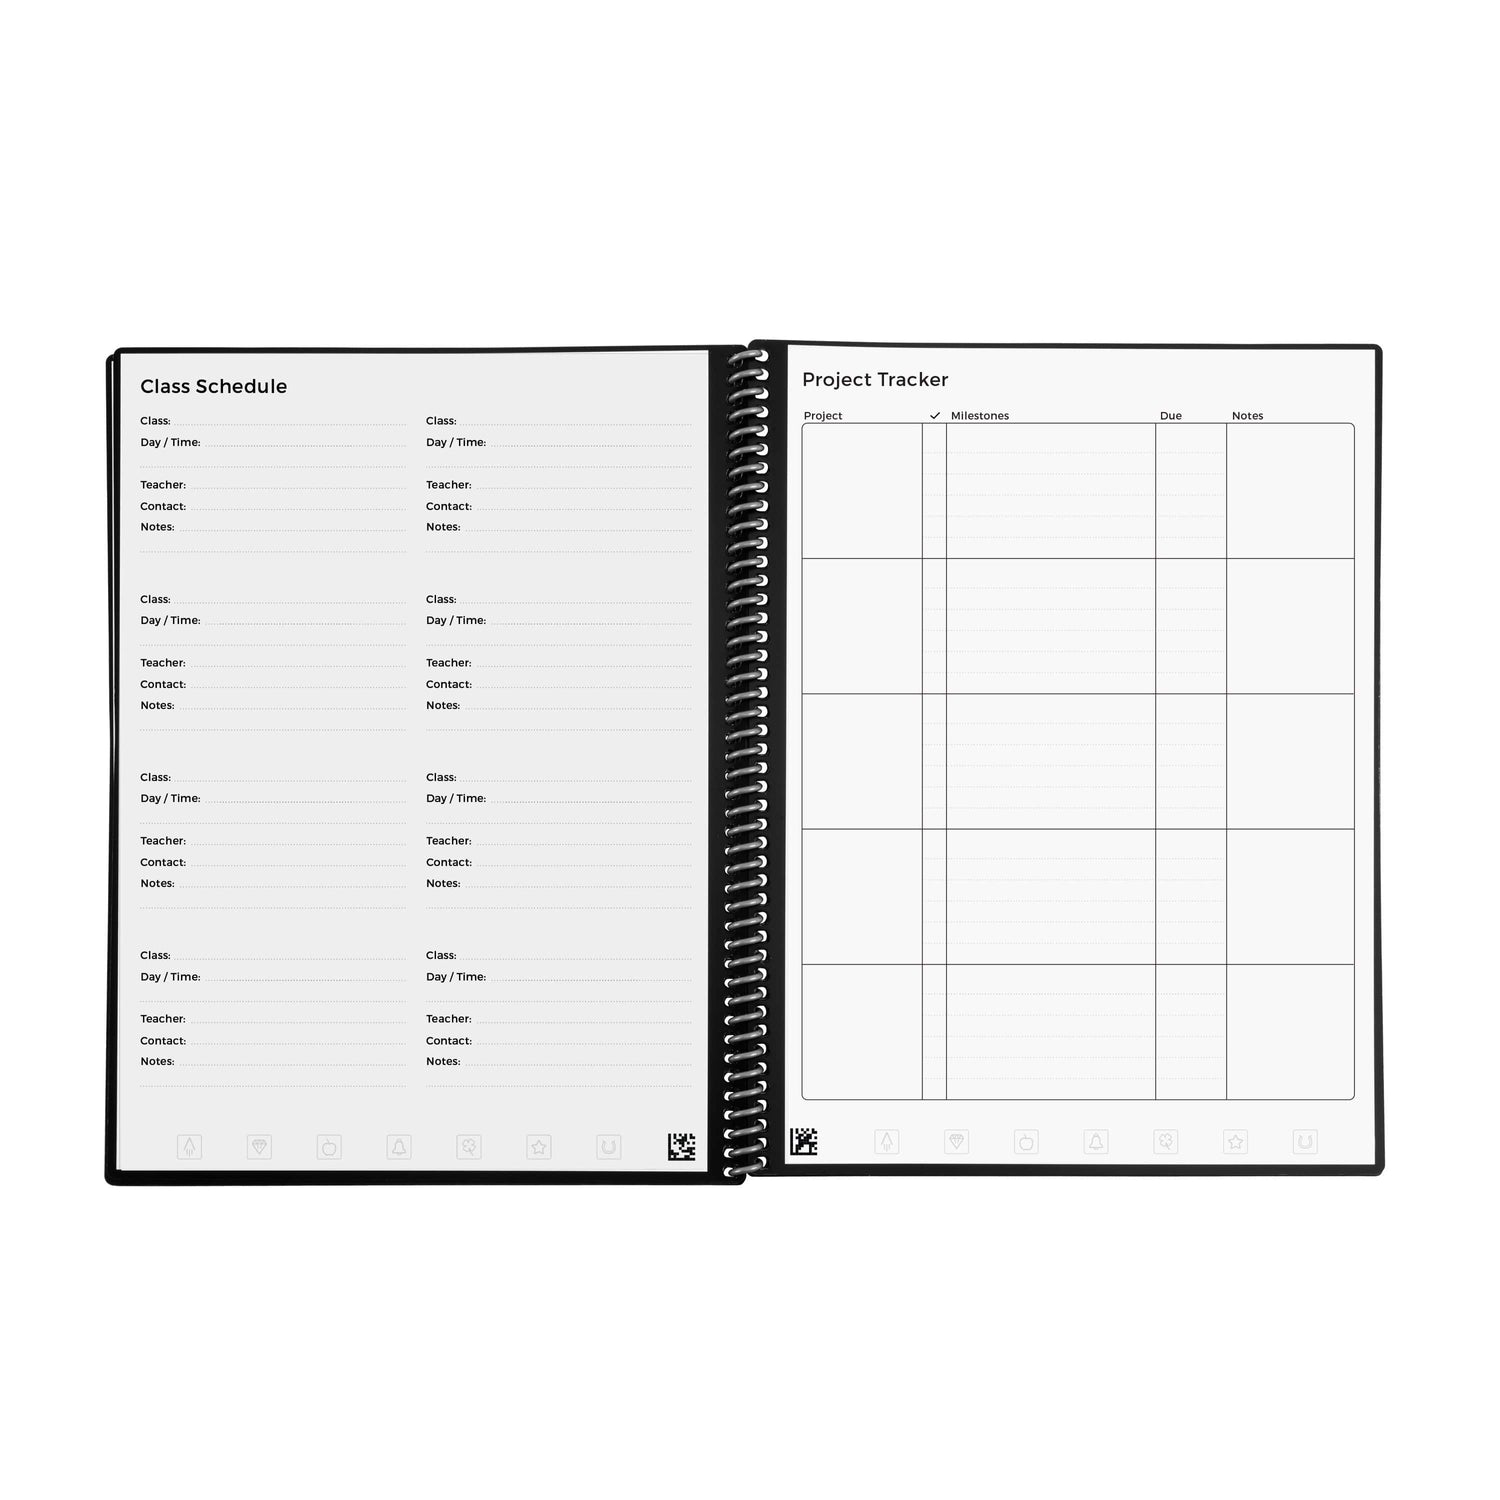 class schedule and project tracker pages